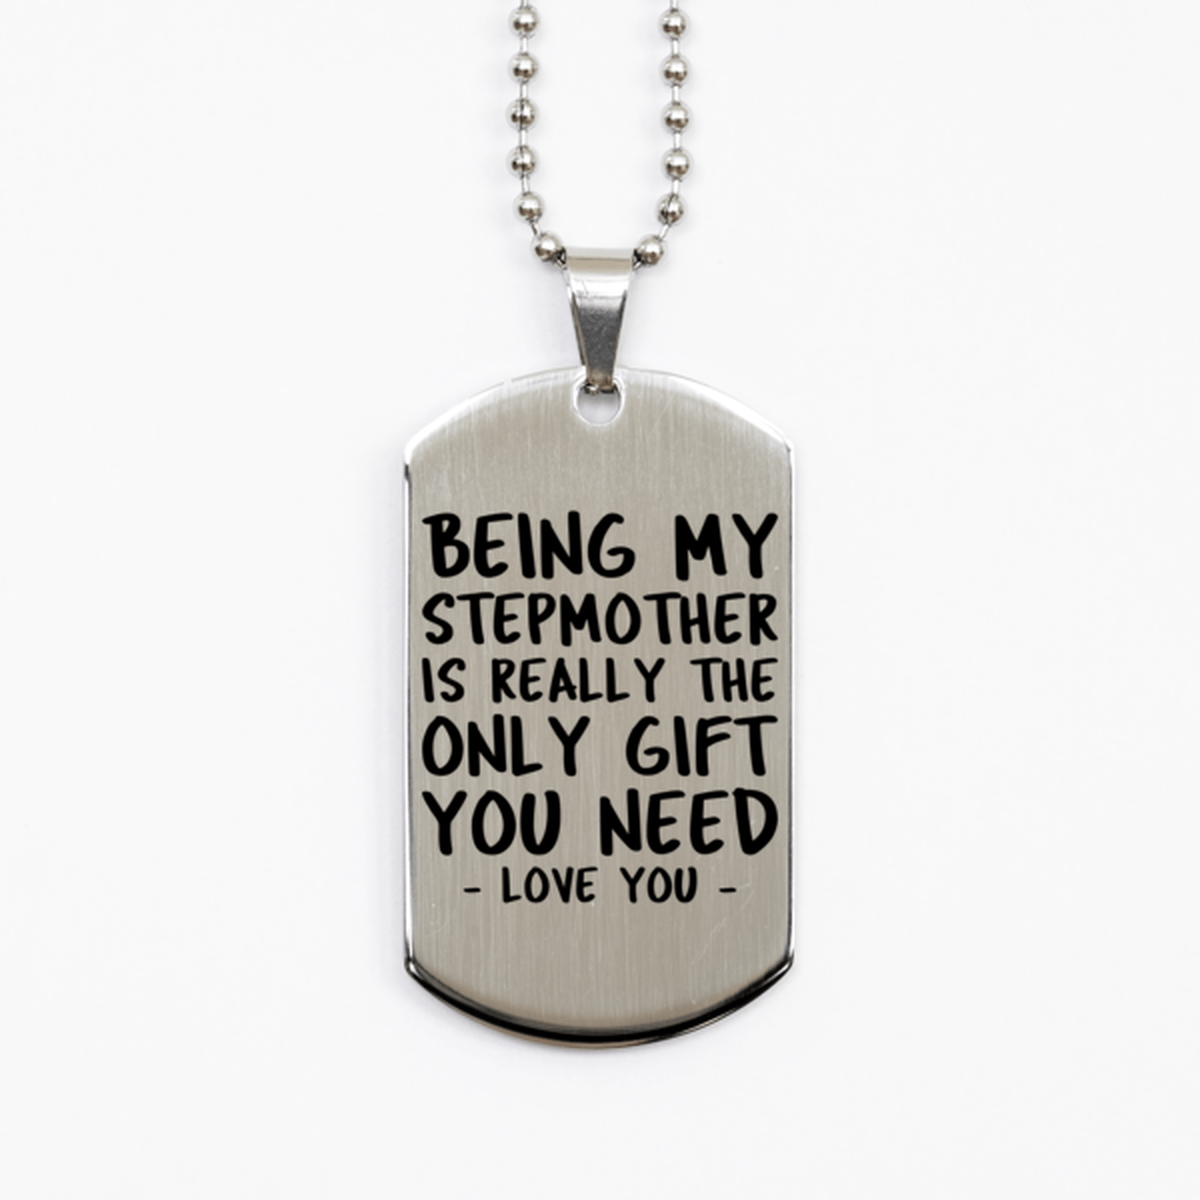 Funny Stepmother Silver Dog Tag Necklace, Being My Stepmother Is Really the Only Gift You Need, Best Birthday Gifts for Stepmother